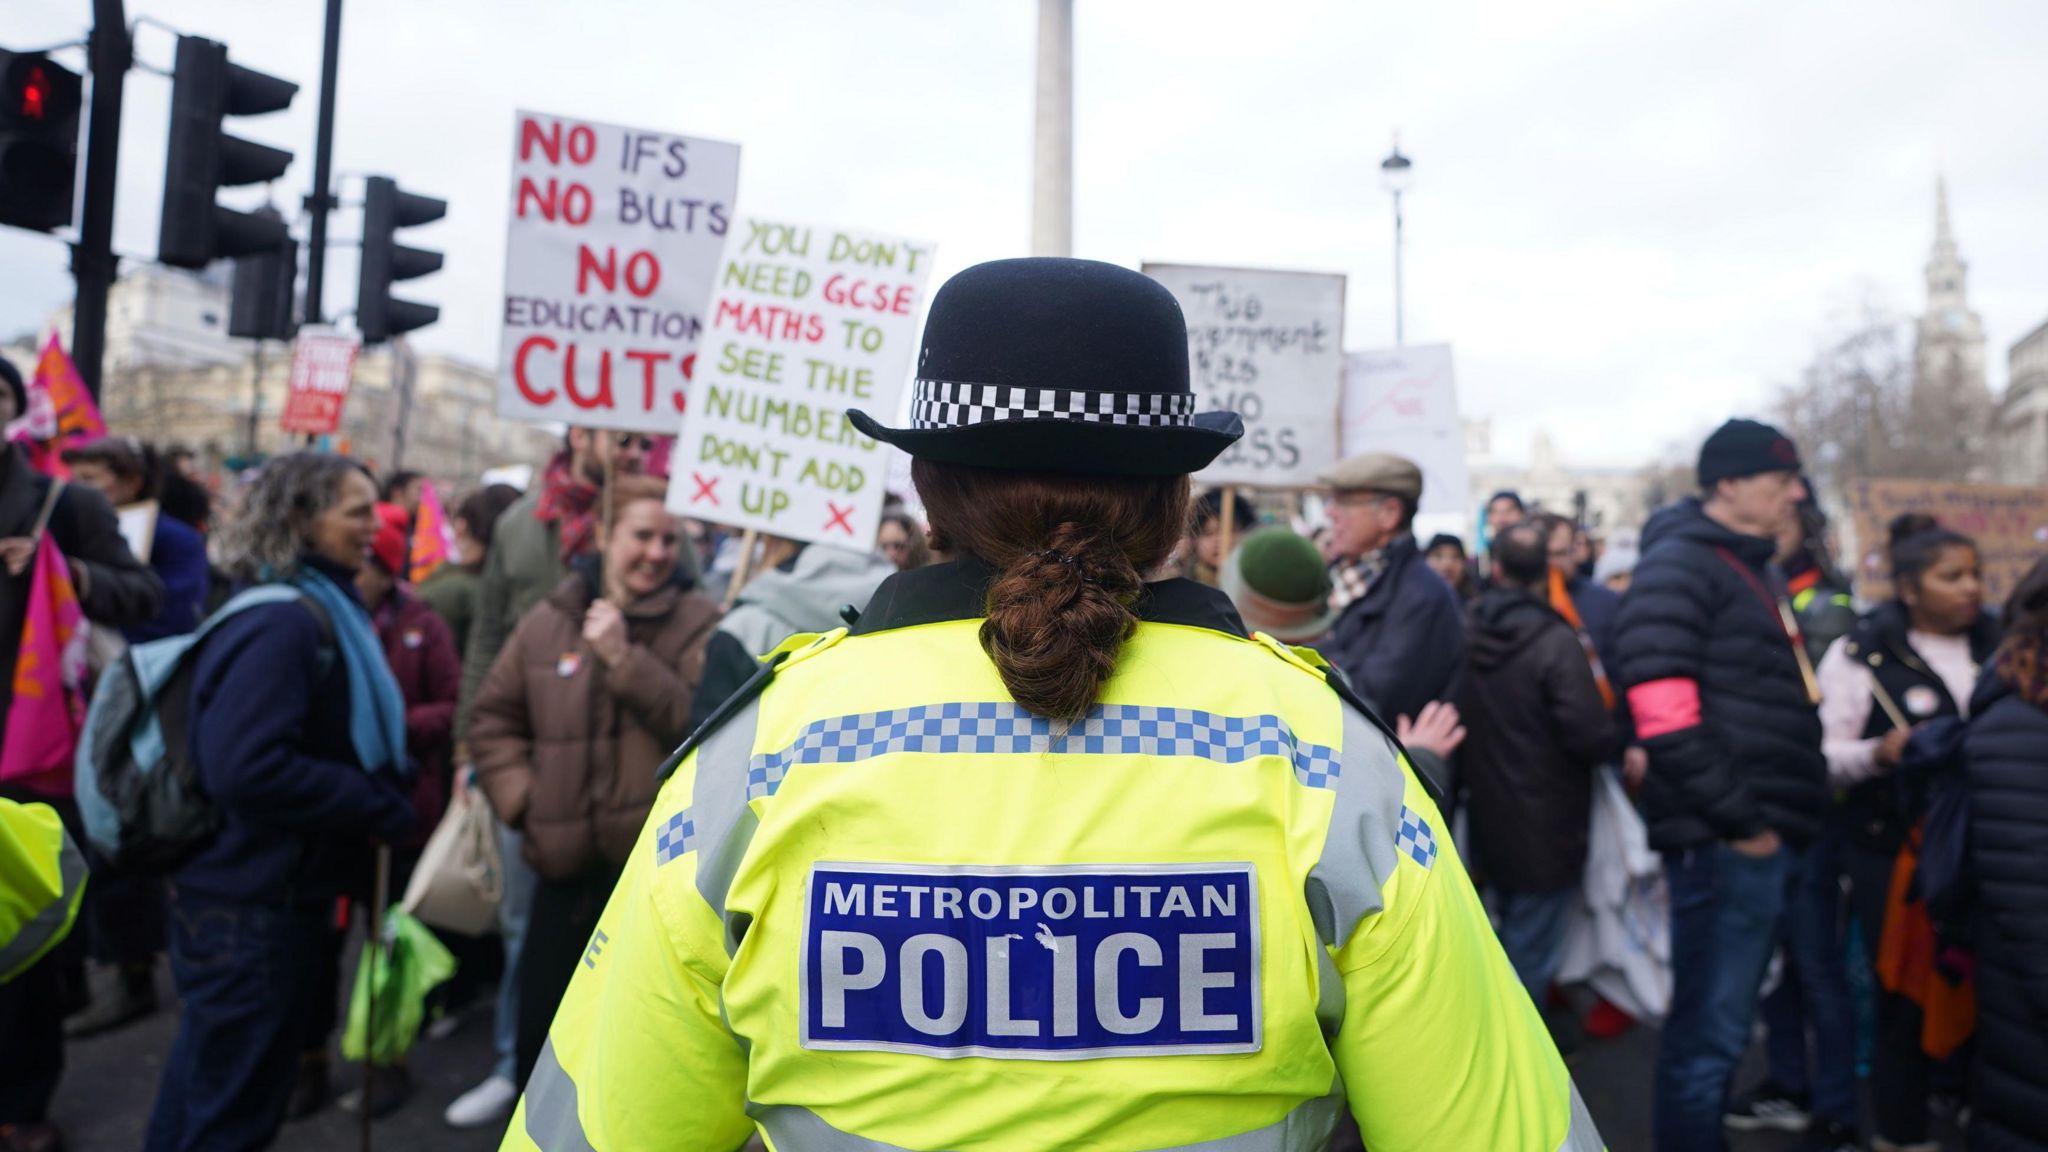 A police officer in front of a crowd in Trafalgar Square